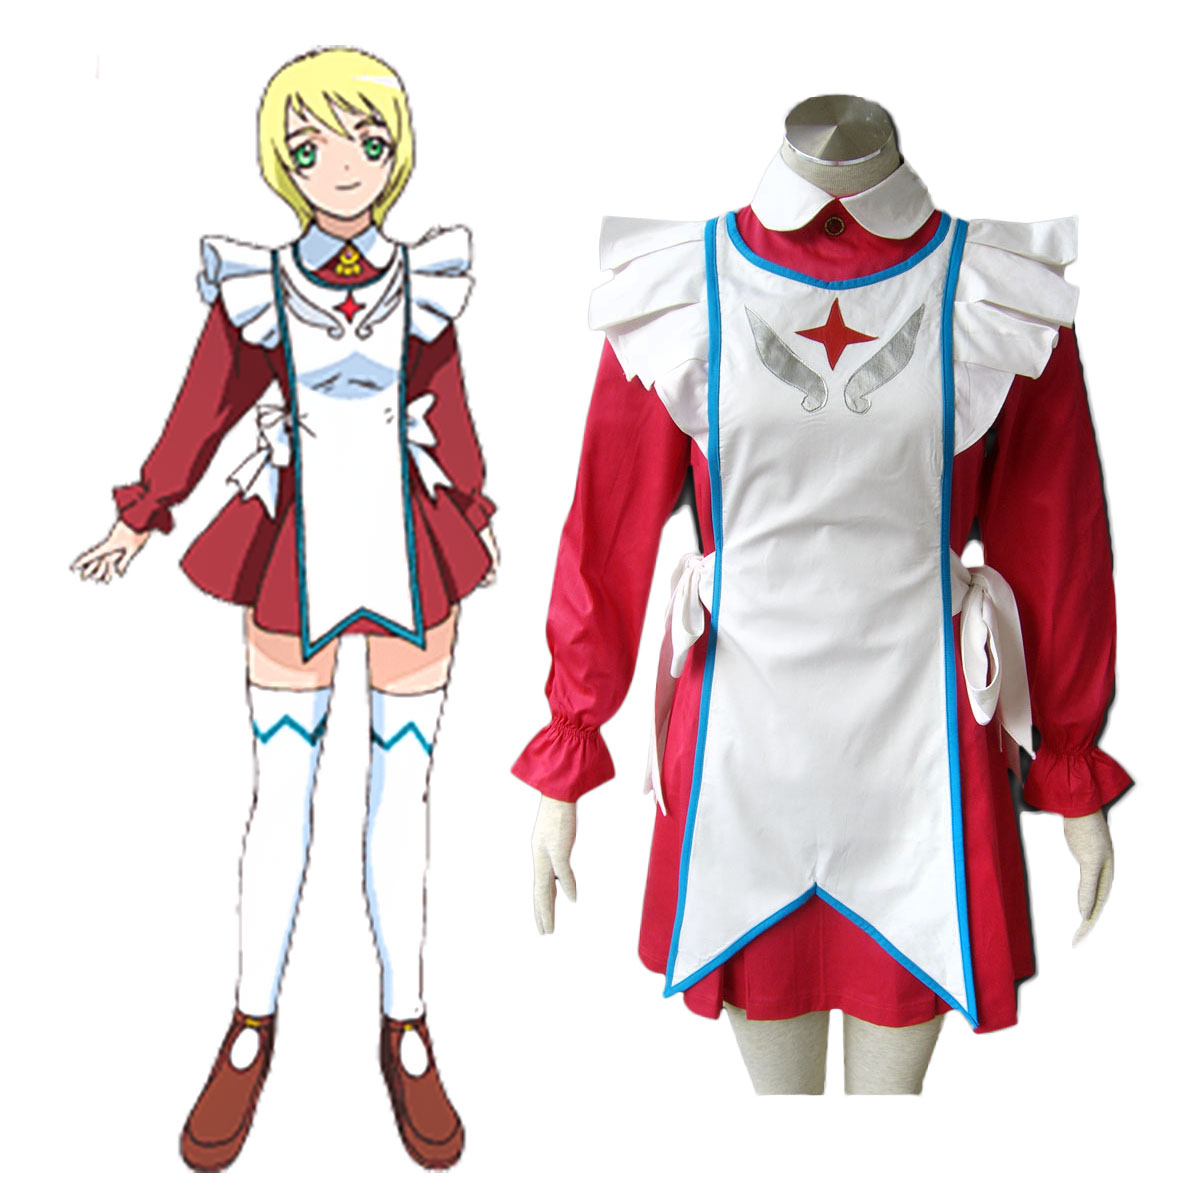 My-Otome Erstin Ho Cosplay Costumes Deluxe Edition